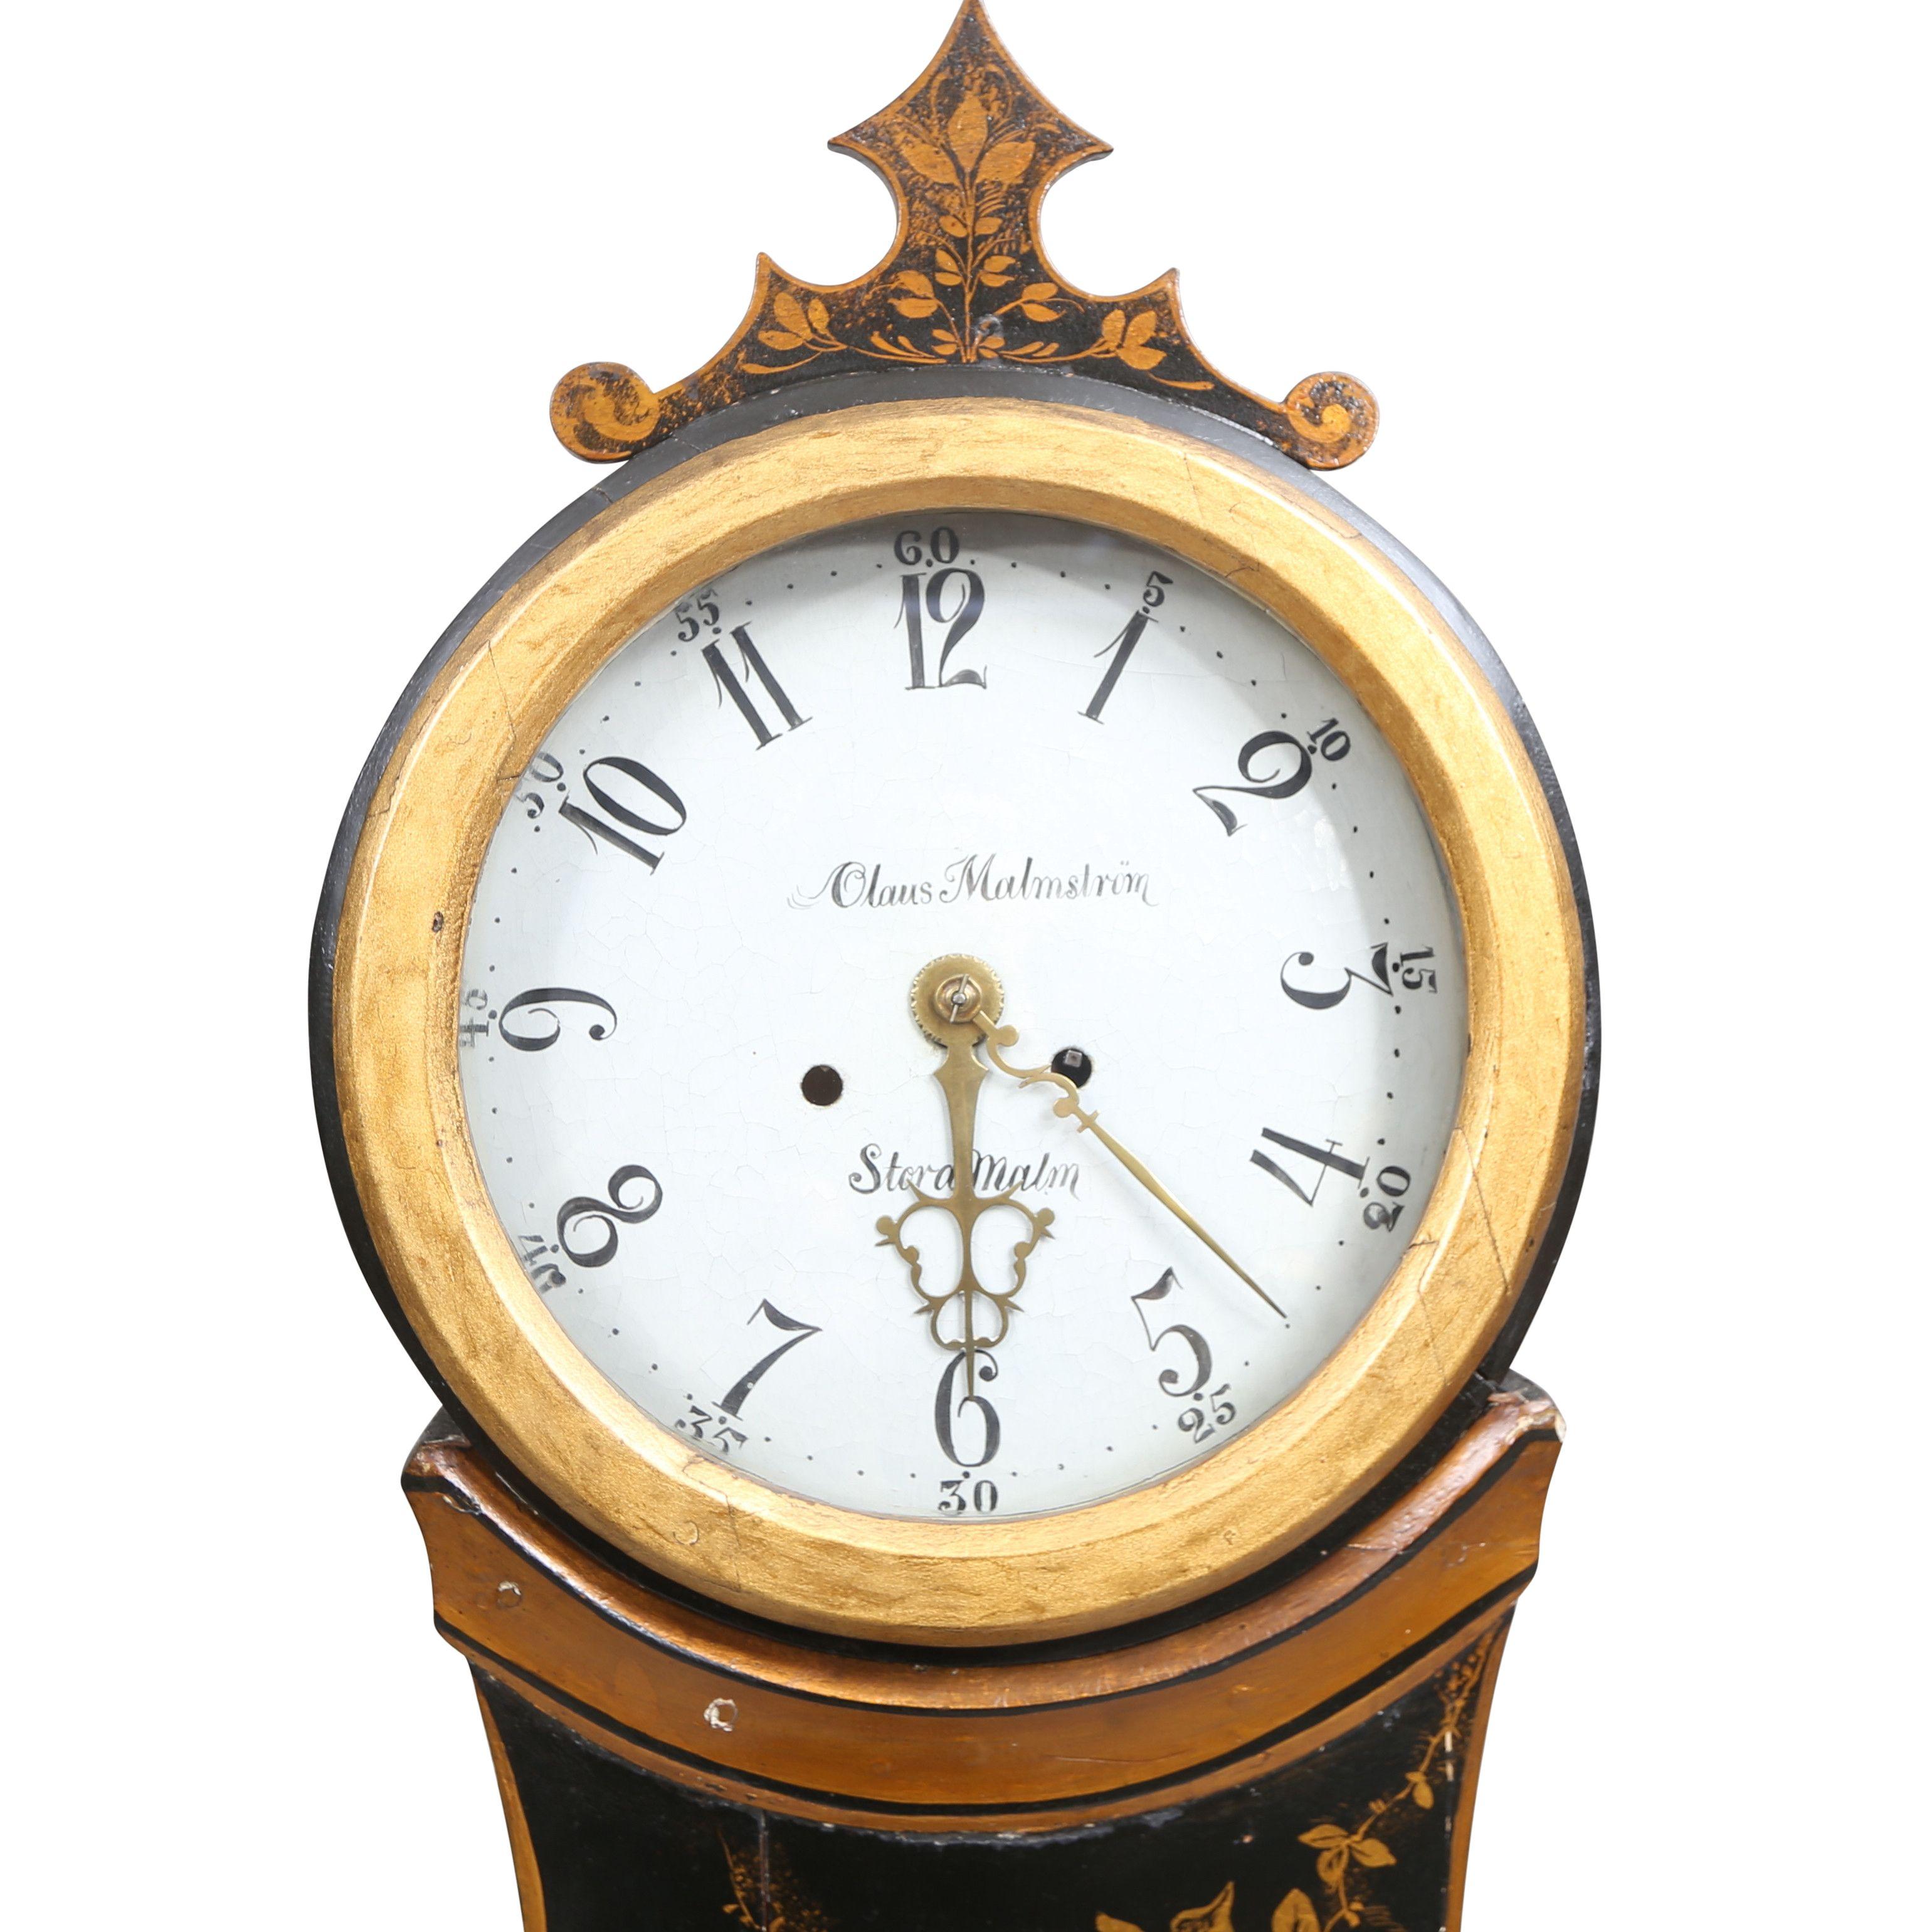 1800's Swedish Mora clock with hand painted chinoiserie gold detailsing against a black painted background (original paintwork). Carved detailing of crown. Dial details include the name of the clockmaker: Olaus Malstrom and village Stora Malm.